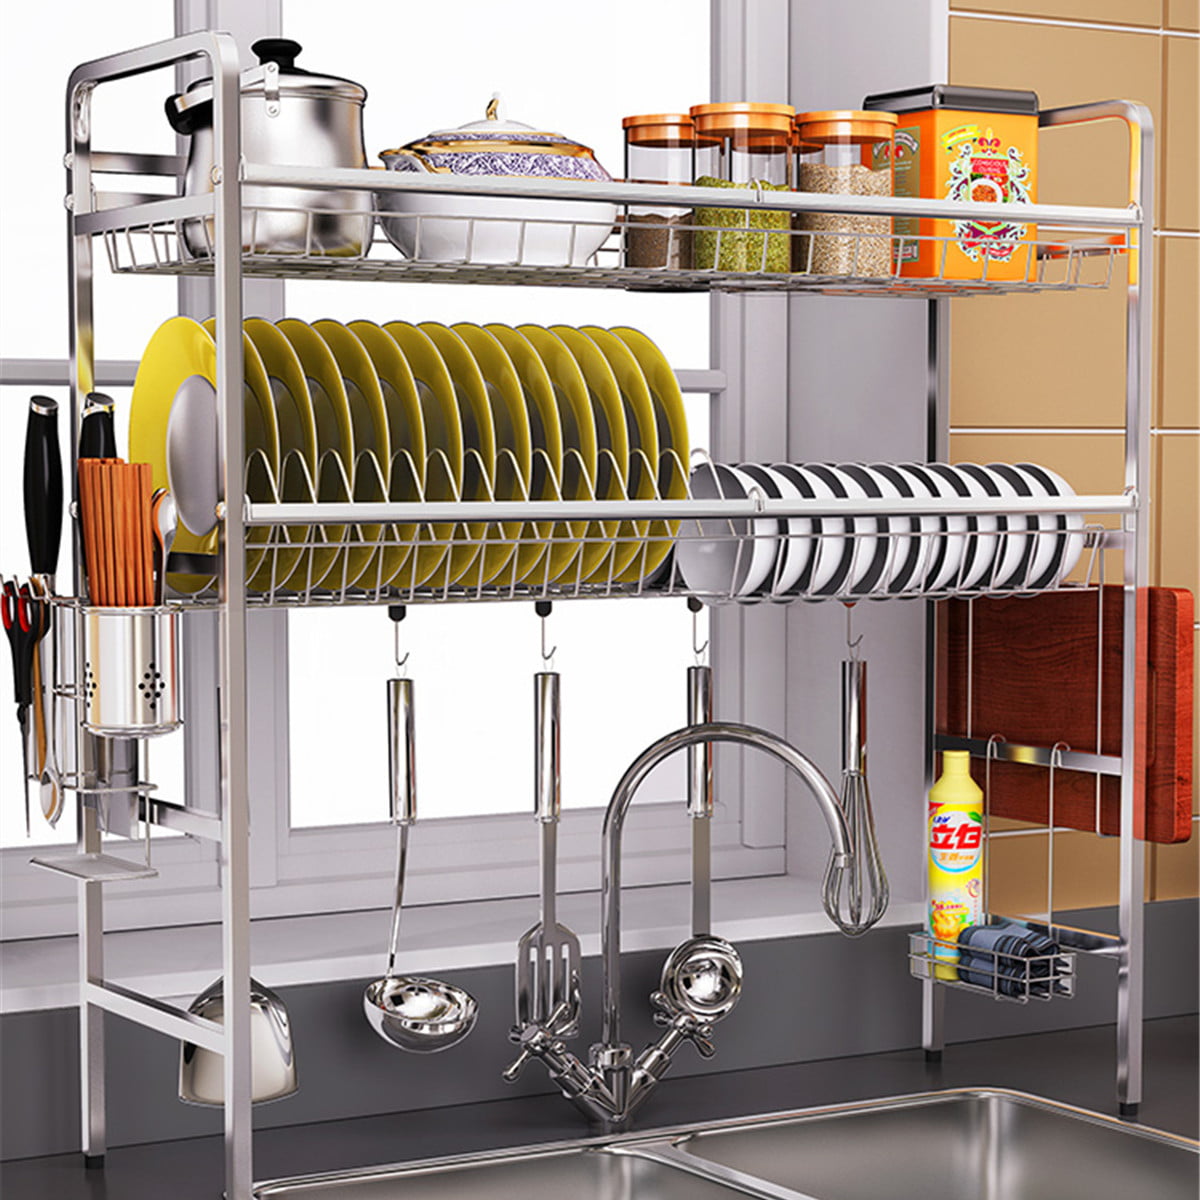 304 Stainless Steel 2 Tier Dish Drying Rack Over Sink Drainer Shelf Stainless Steel Sink Drying Rack